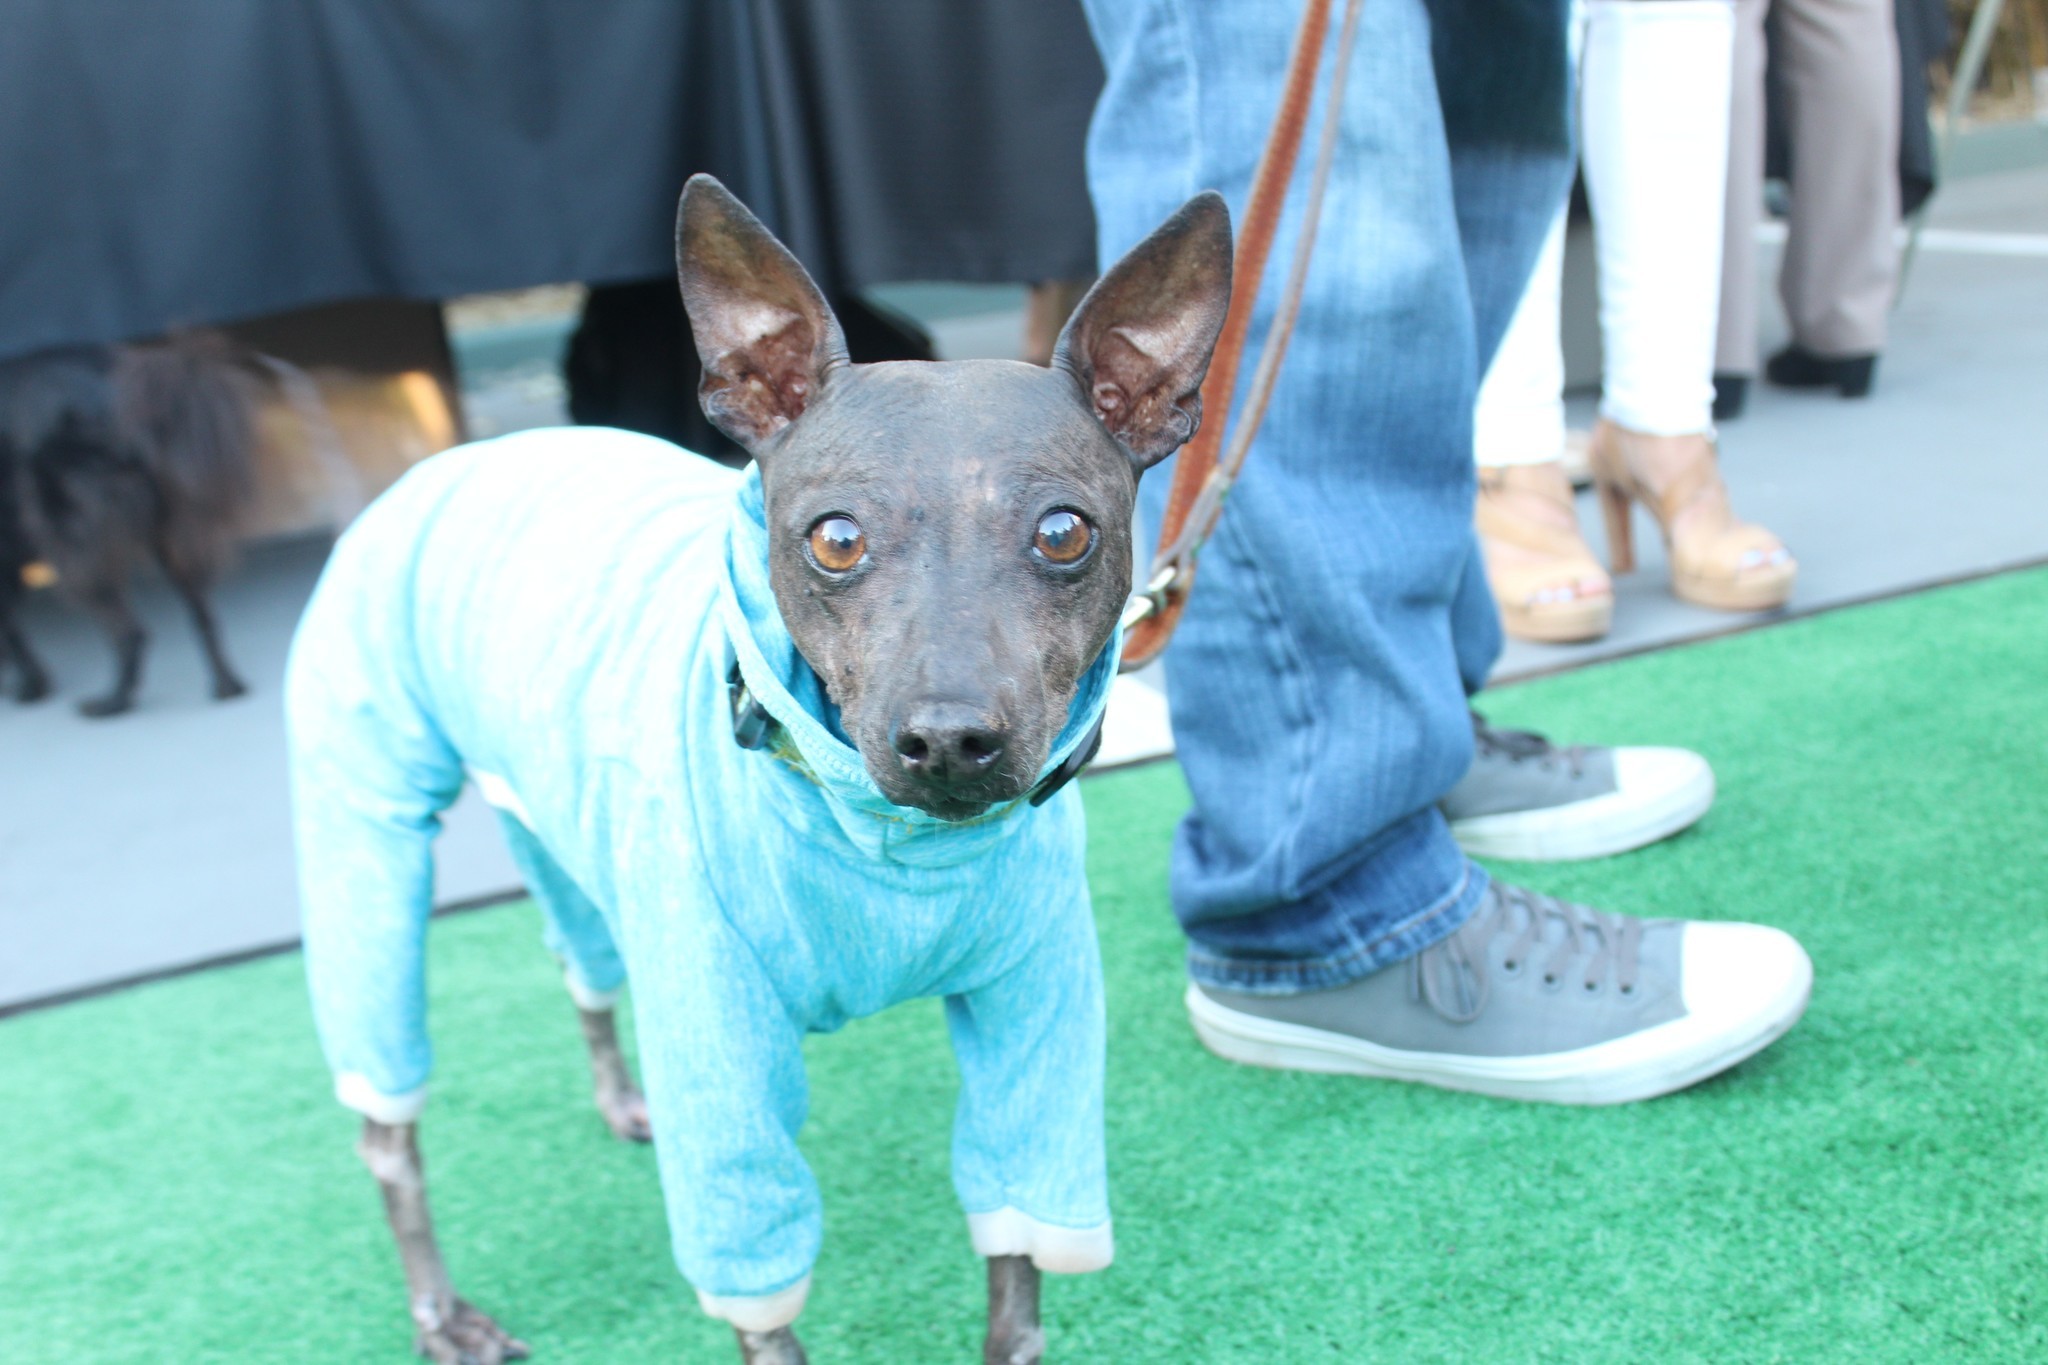 Fluffy’s human, La Jollan Eric Hoffman, dressed her in comfy pajamas because she’s an American Hairless Terrier and she’s cold.